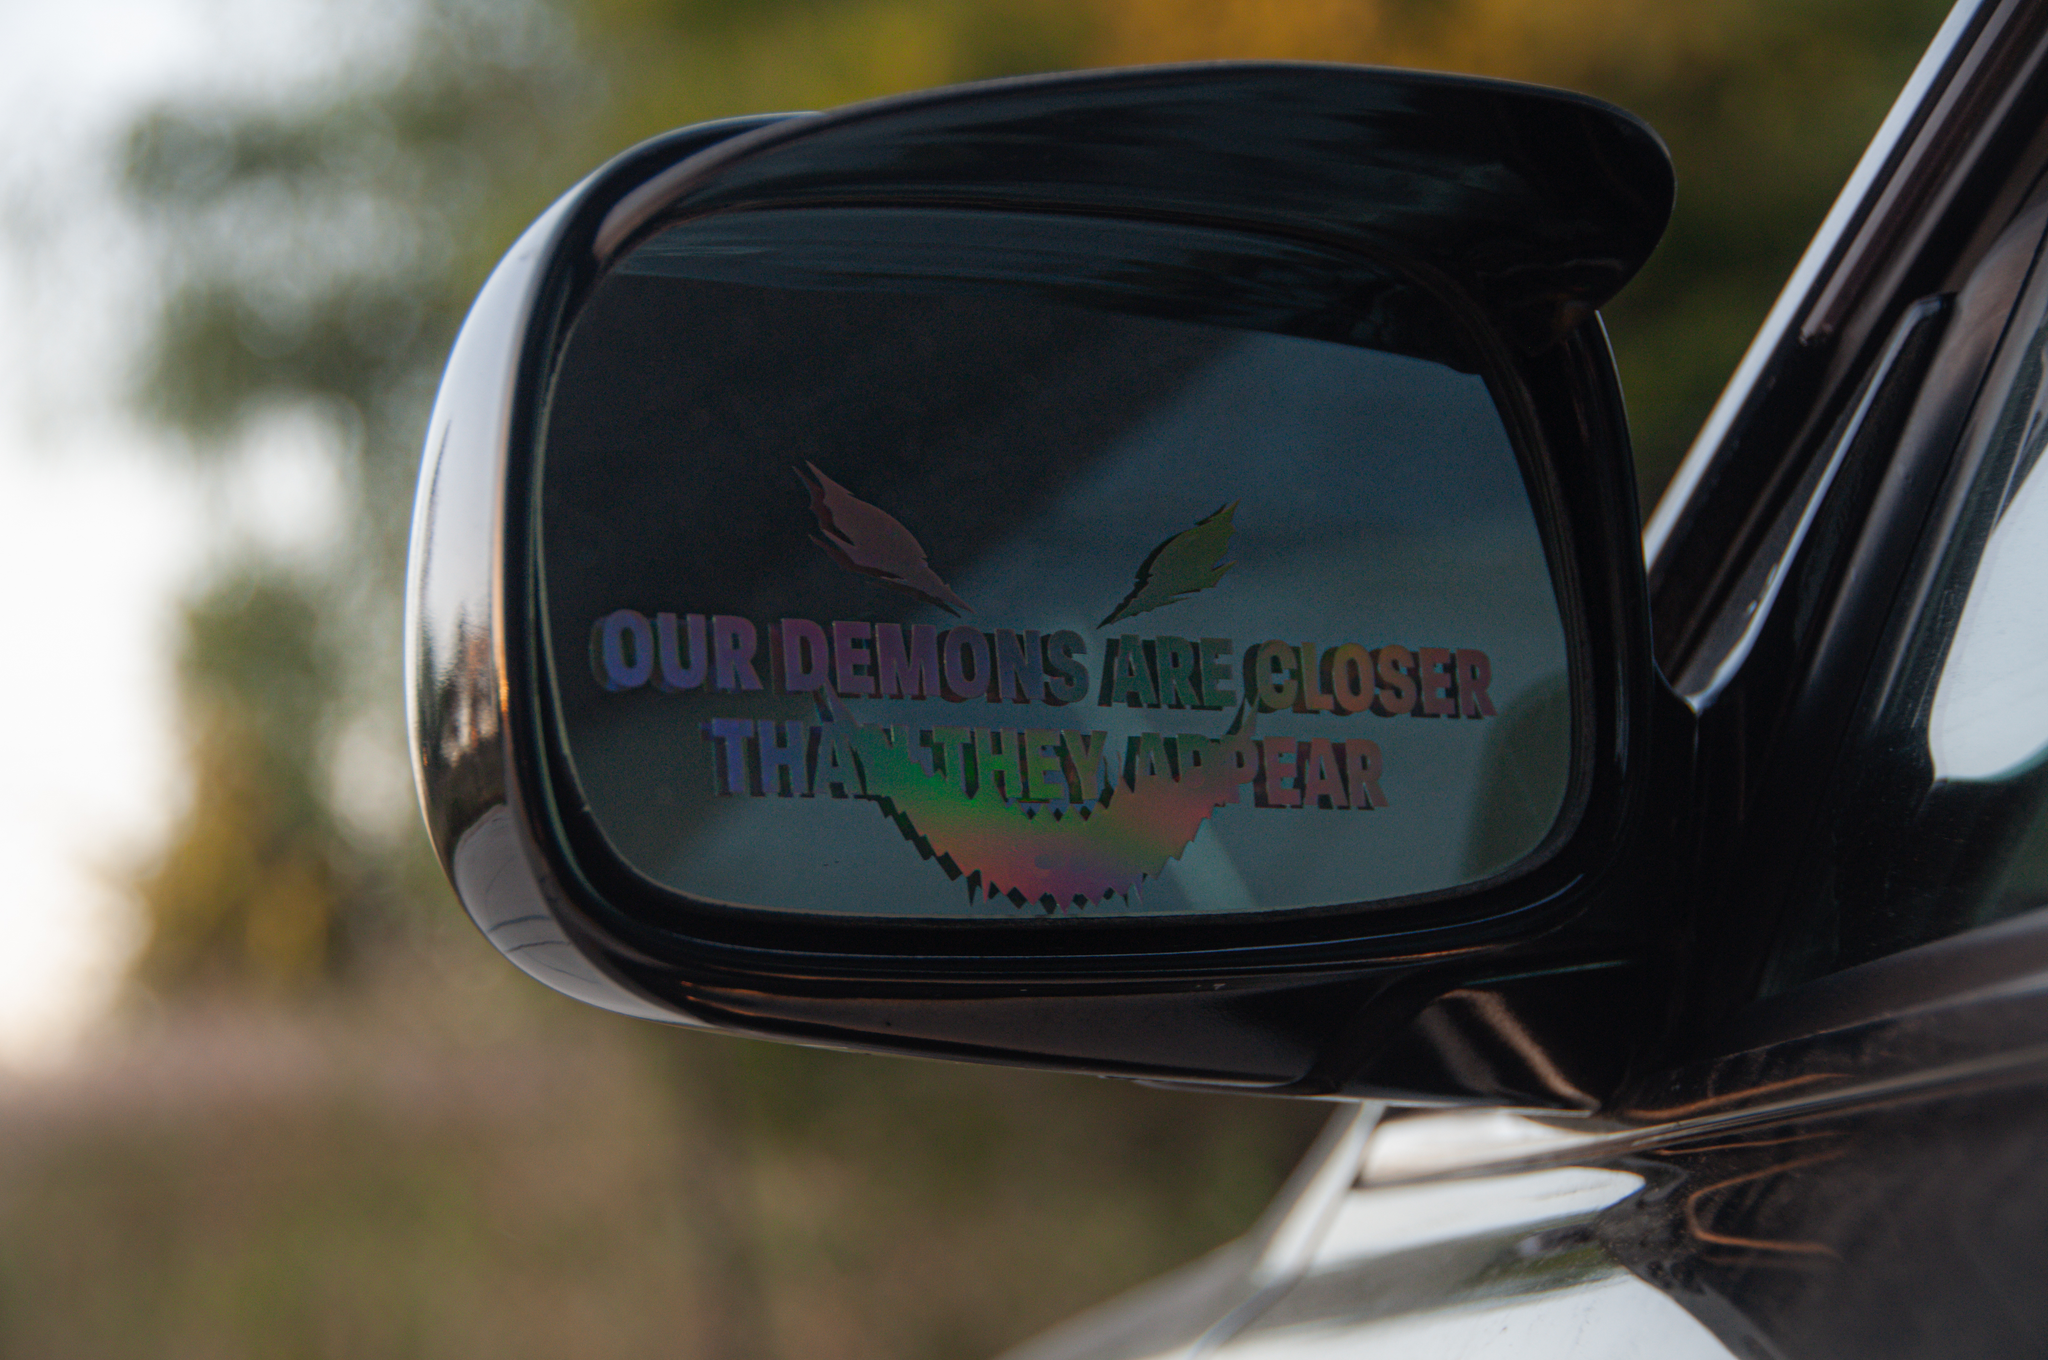 Our demons are closer than they appear | Decal